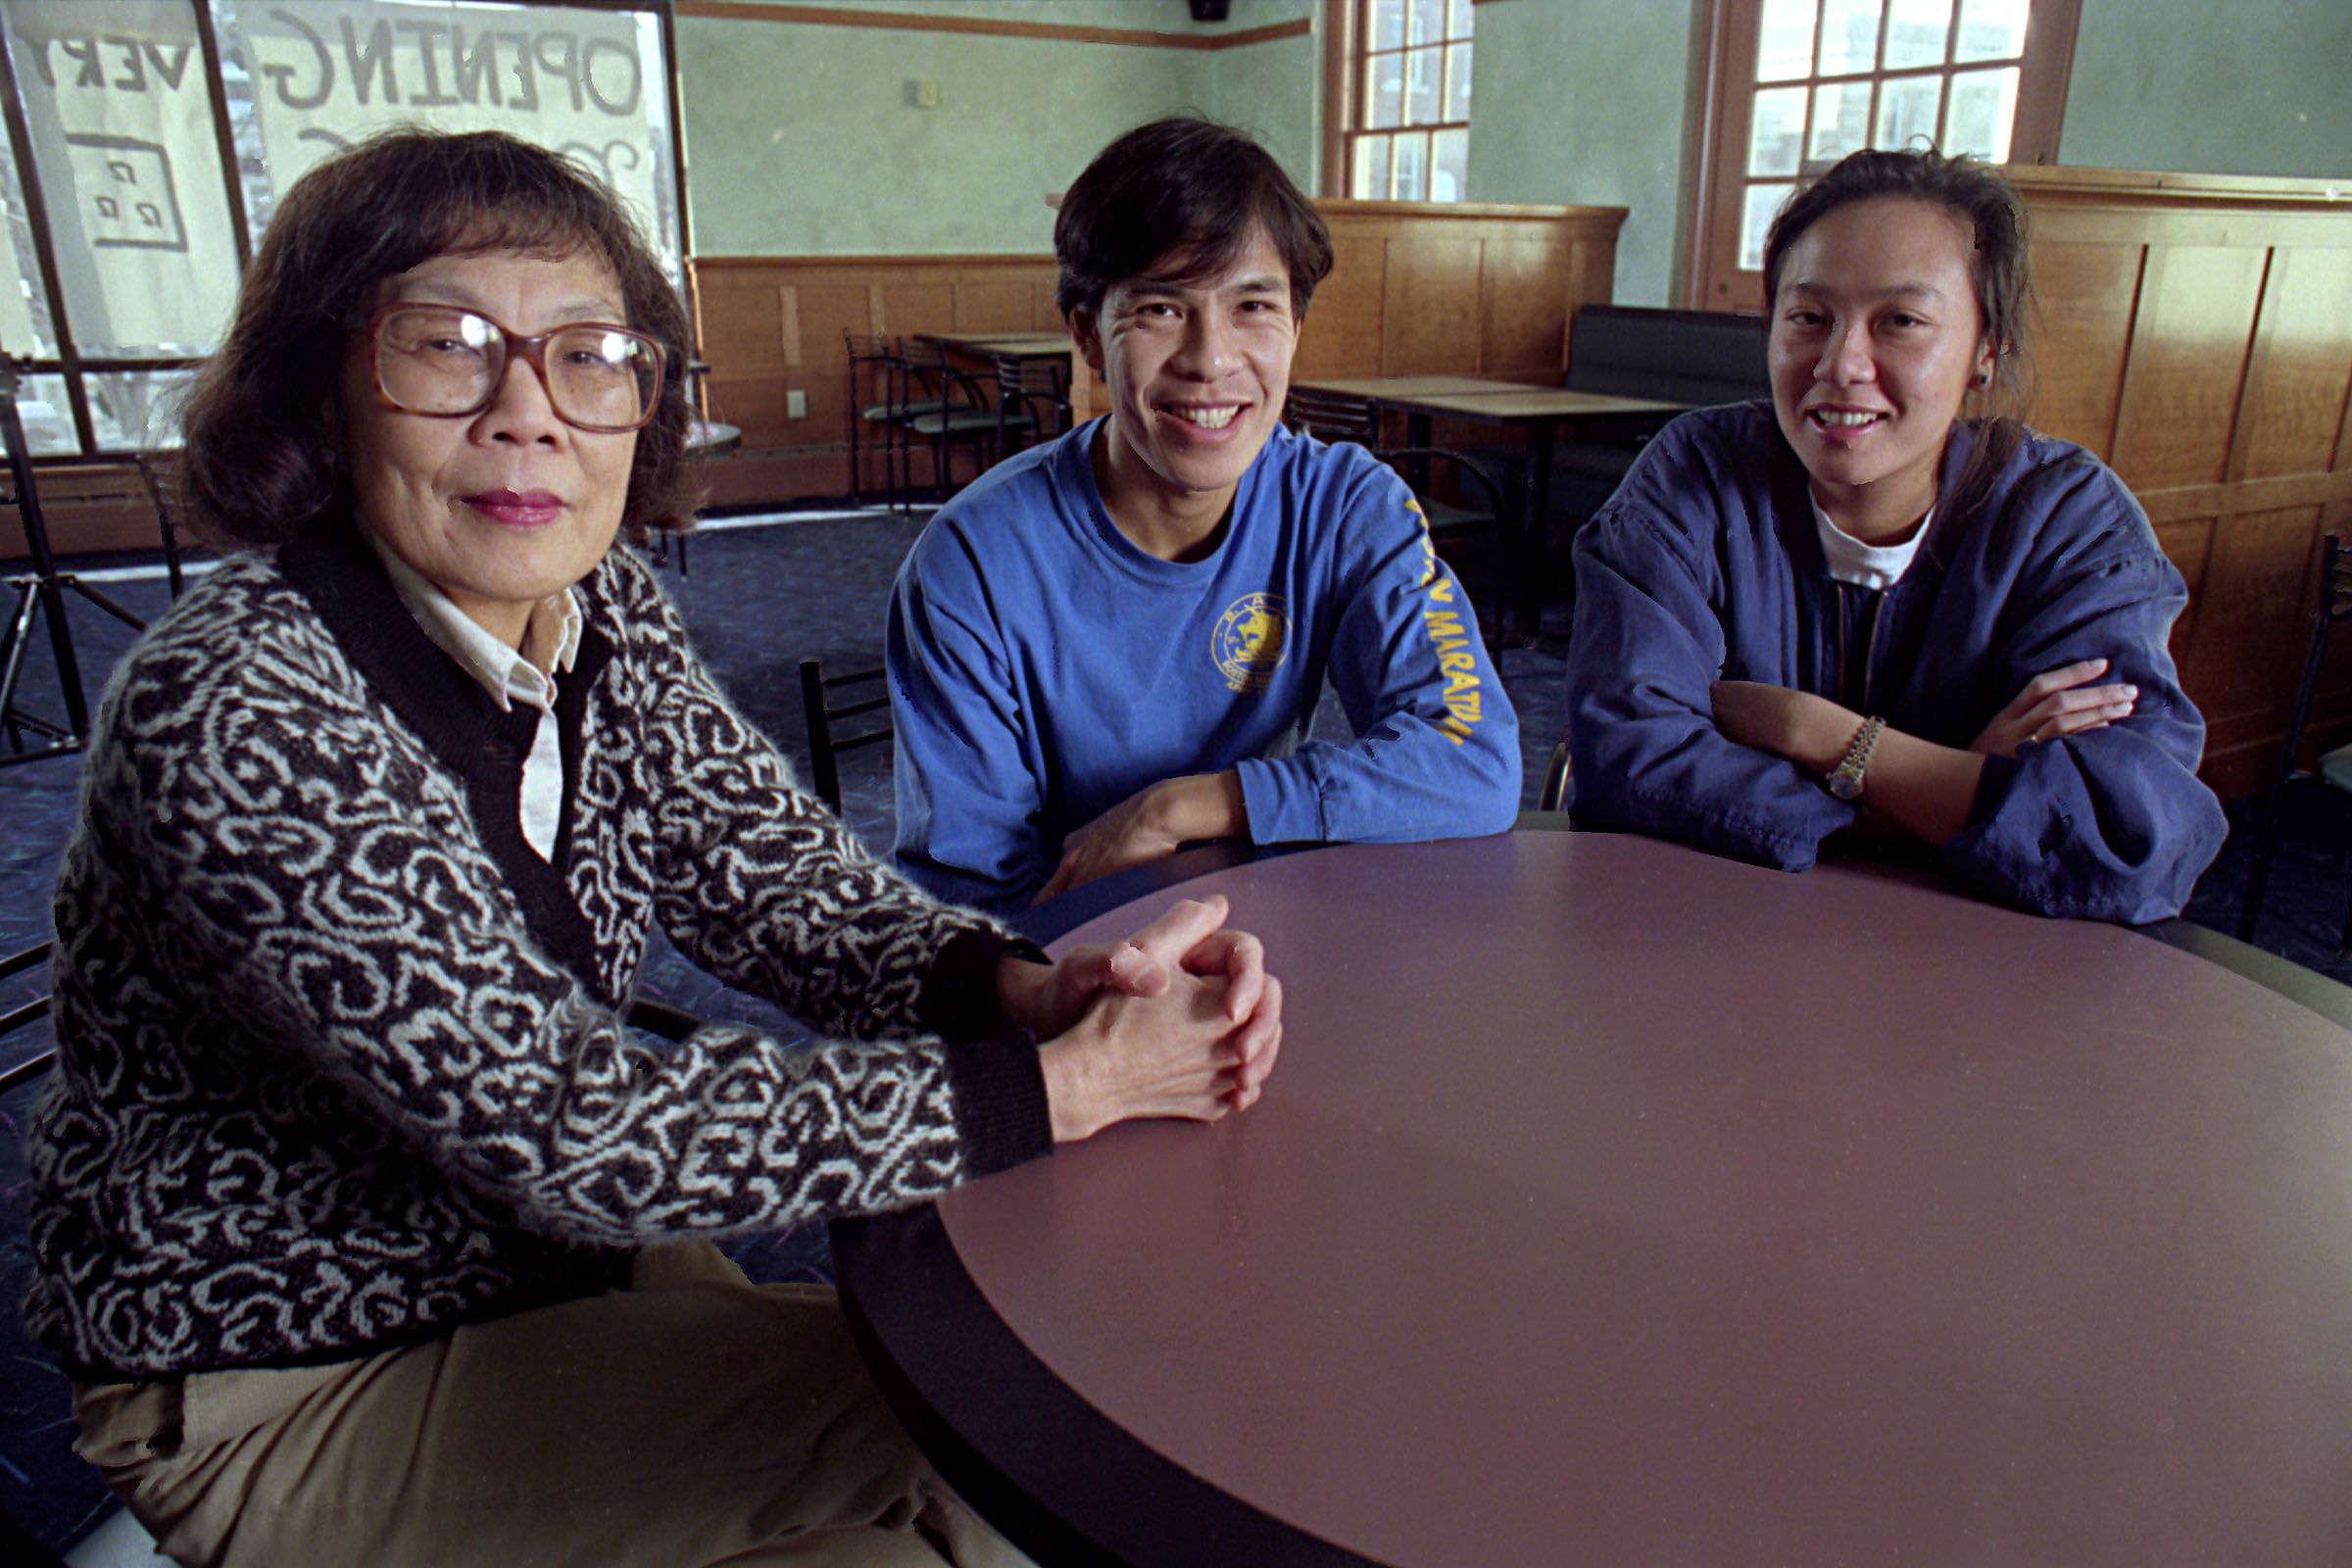 Photographed on Feb. 6, 1994, Cynthia Ou, left, opened a restaurant in Hanover, N.H., with help from two of her children, Eddy and Emily Ou. Ou had been running a Chinese restaurant in the Dartmouth Medical School cafeteria for over two decades, serving over a million lunches. (Valley News - Geoff Hansen) Copyright Valley News. May not be reprinted or used online without permission. Send requests to permission@vnews.com.